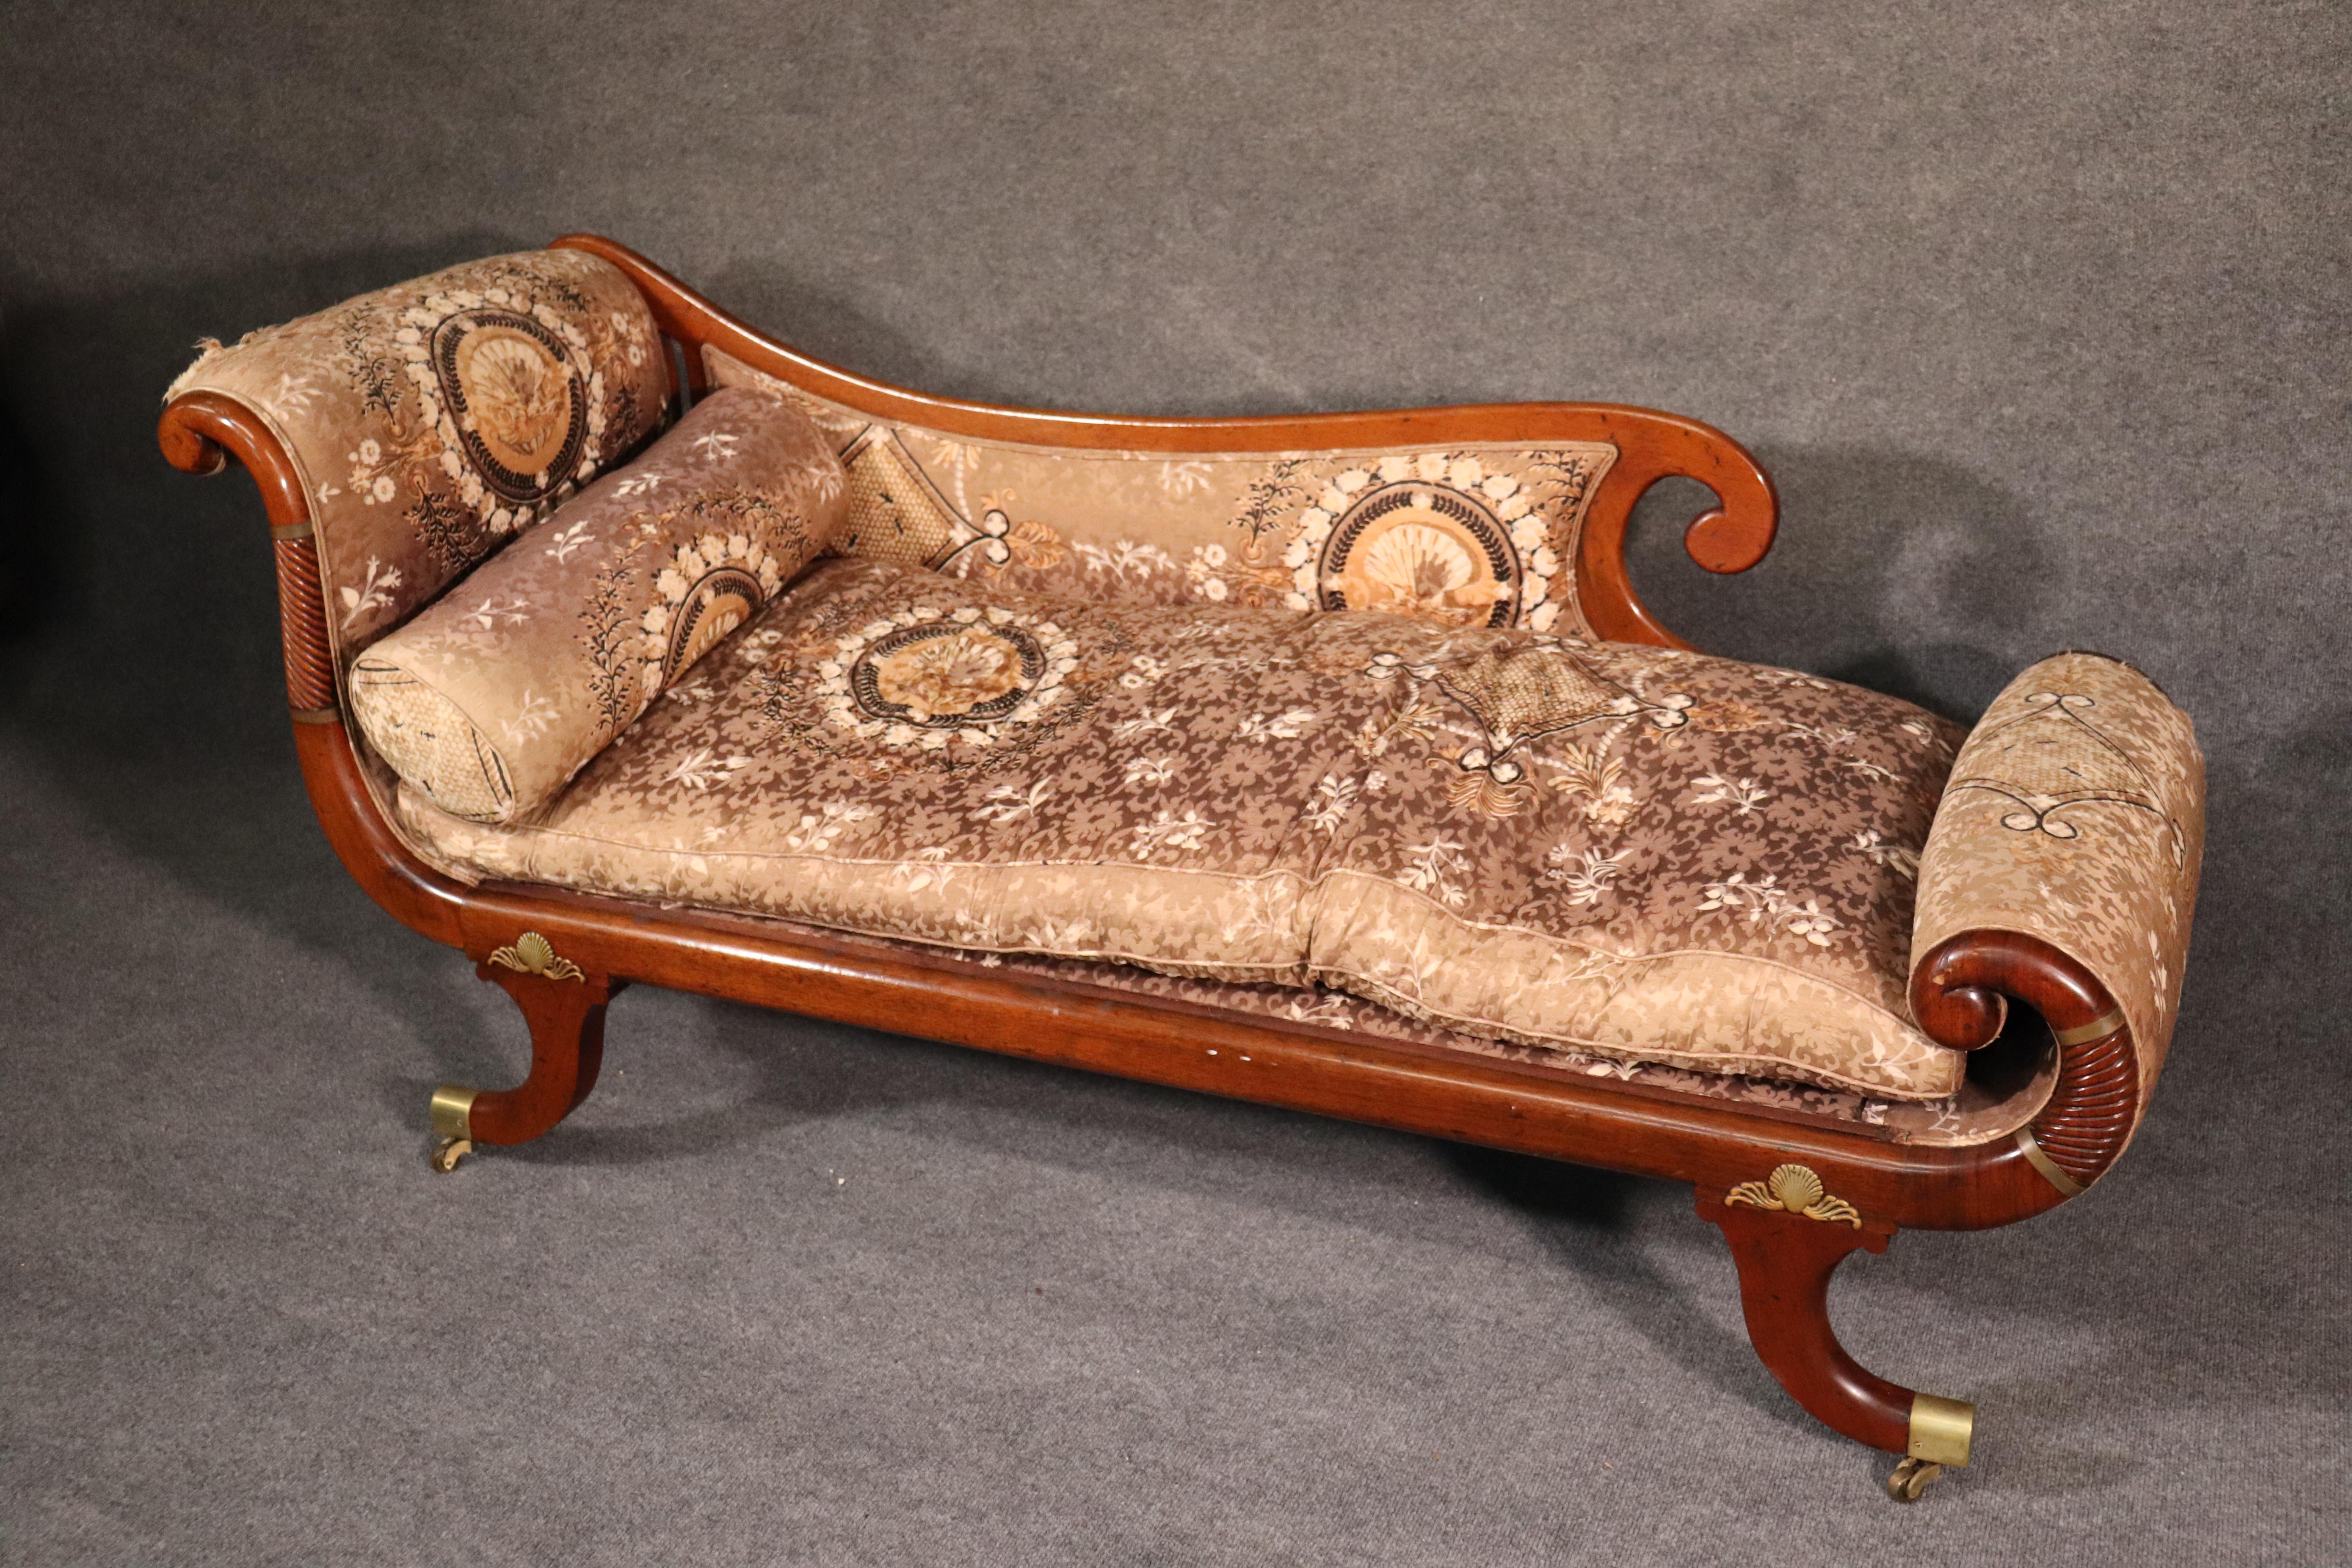 This is a spectacular and rare French recamier. The solid mahogany frame is adorned with fine solid brass inlay and feet with casters, also of brass. The upholstery is original and will need to be reupholstered. The cushion is filled with goose down